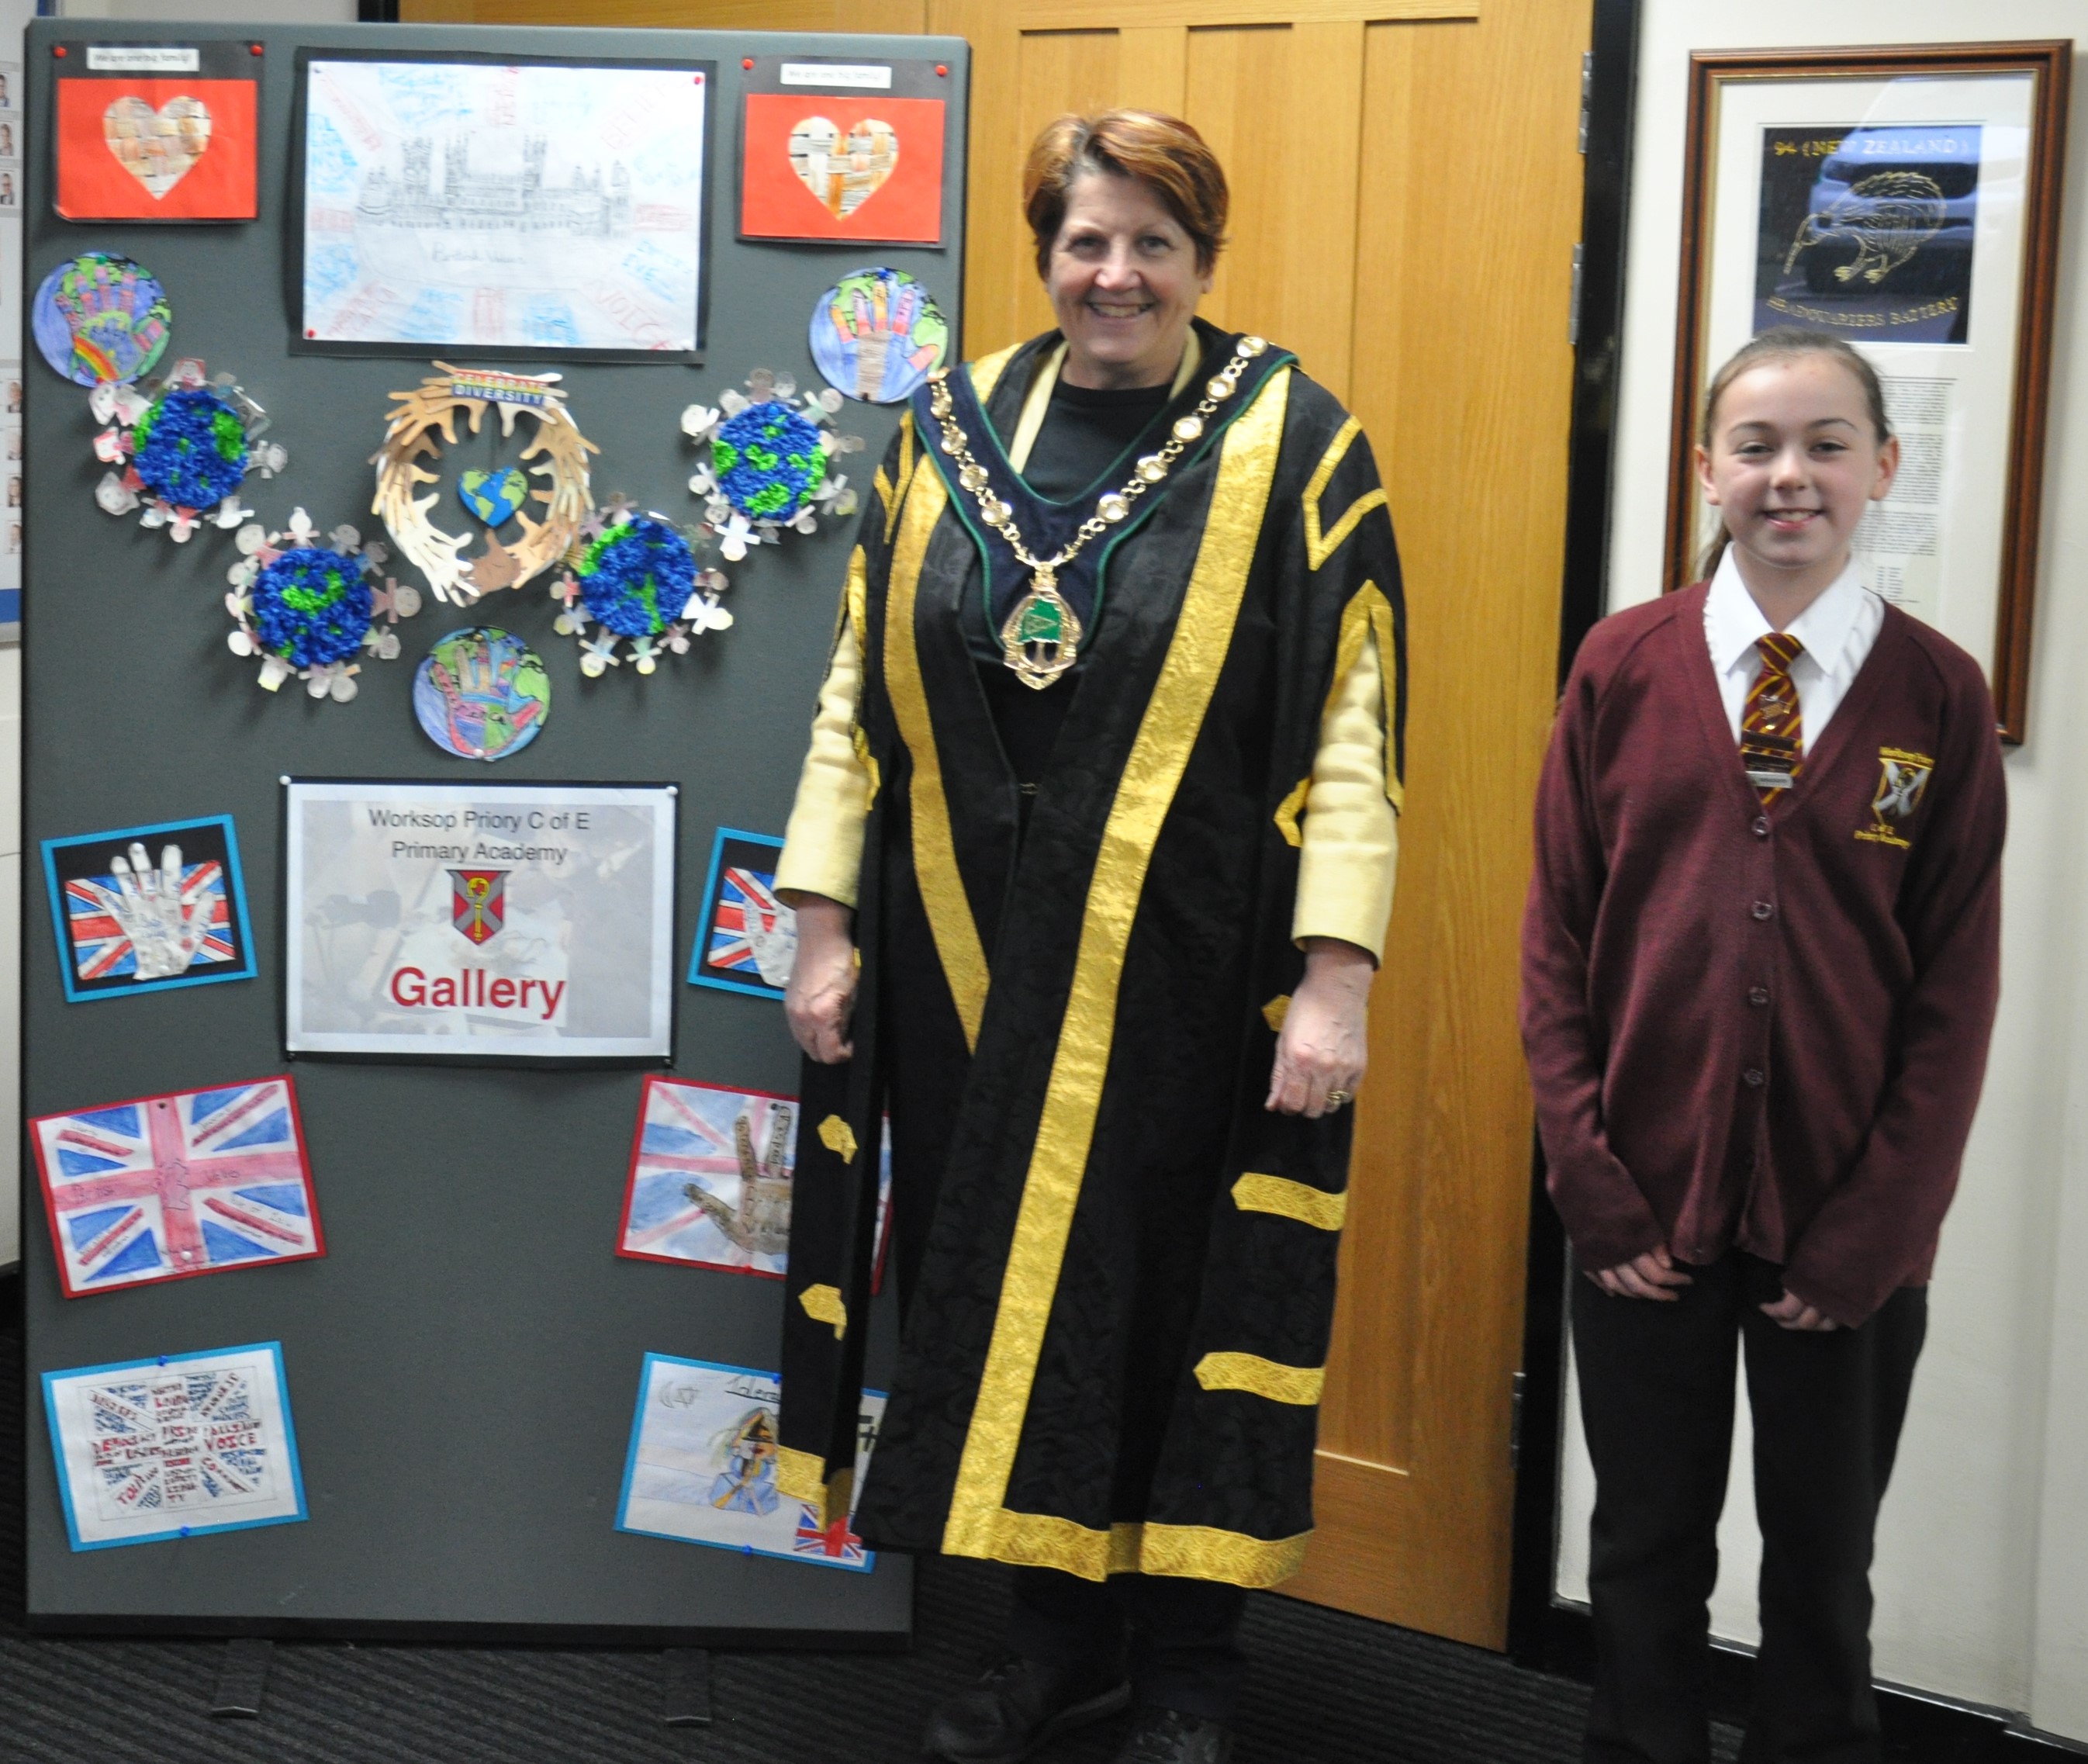 Children’s British Values Display brightens up Council HQ